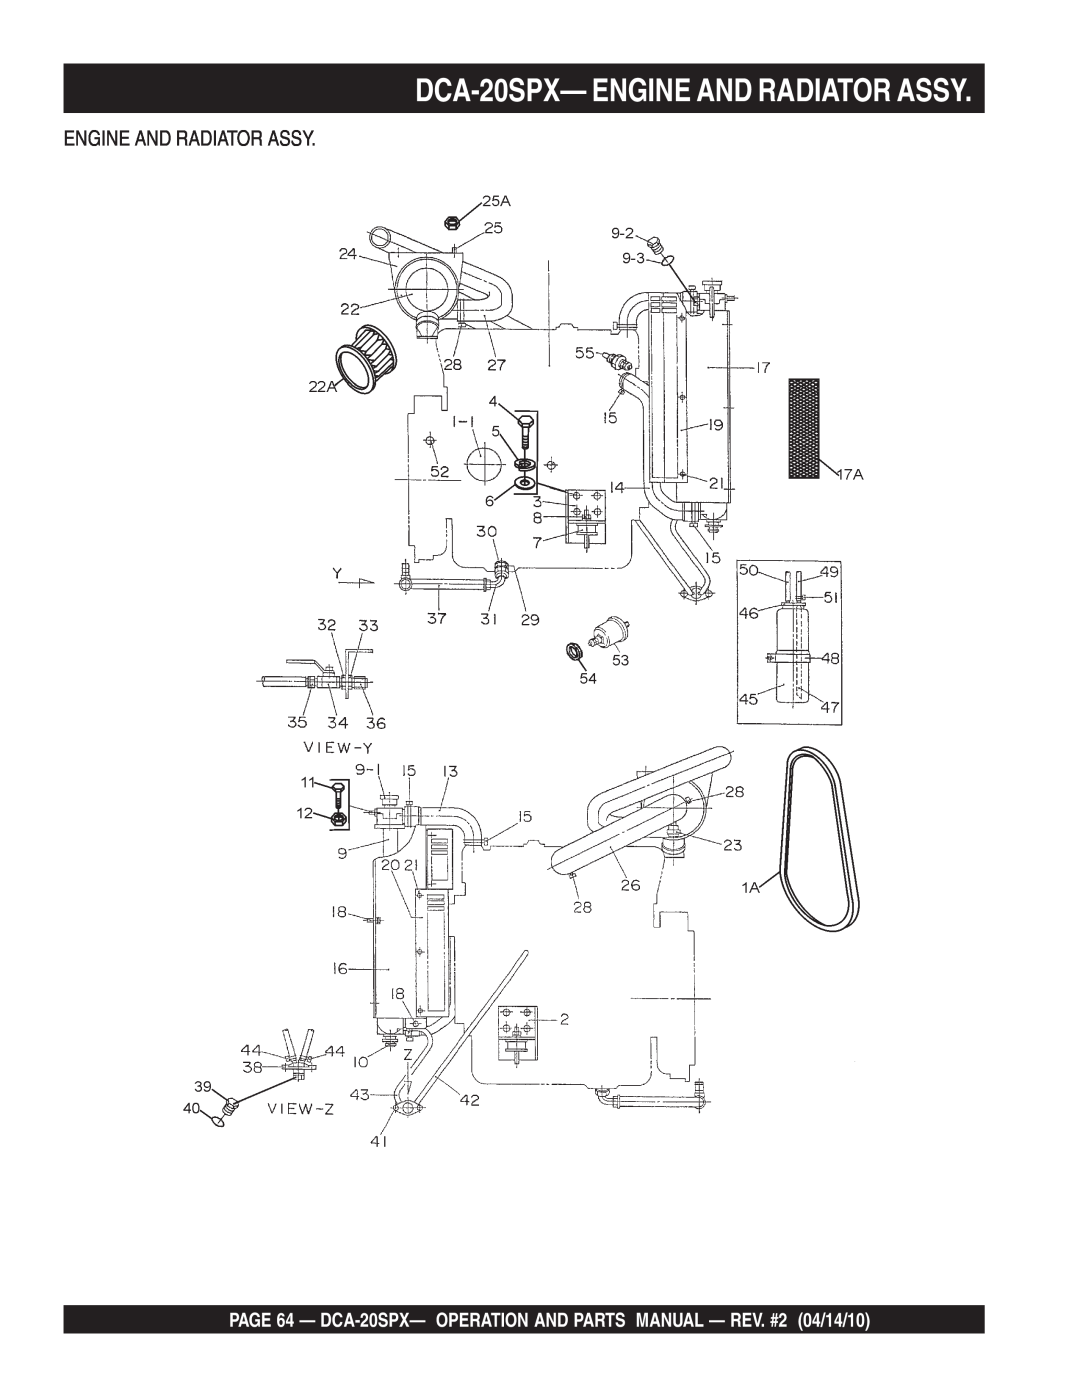 Multiquip DCA-20SPX- ENGINE AND RADIATOR ASSY, PAGE 64 - DCA-20SPX- OPERATION AND PARTS MANUAL - REV. #2 04/14/10 